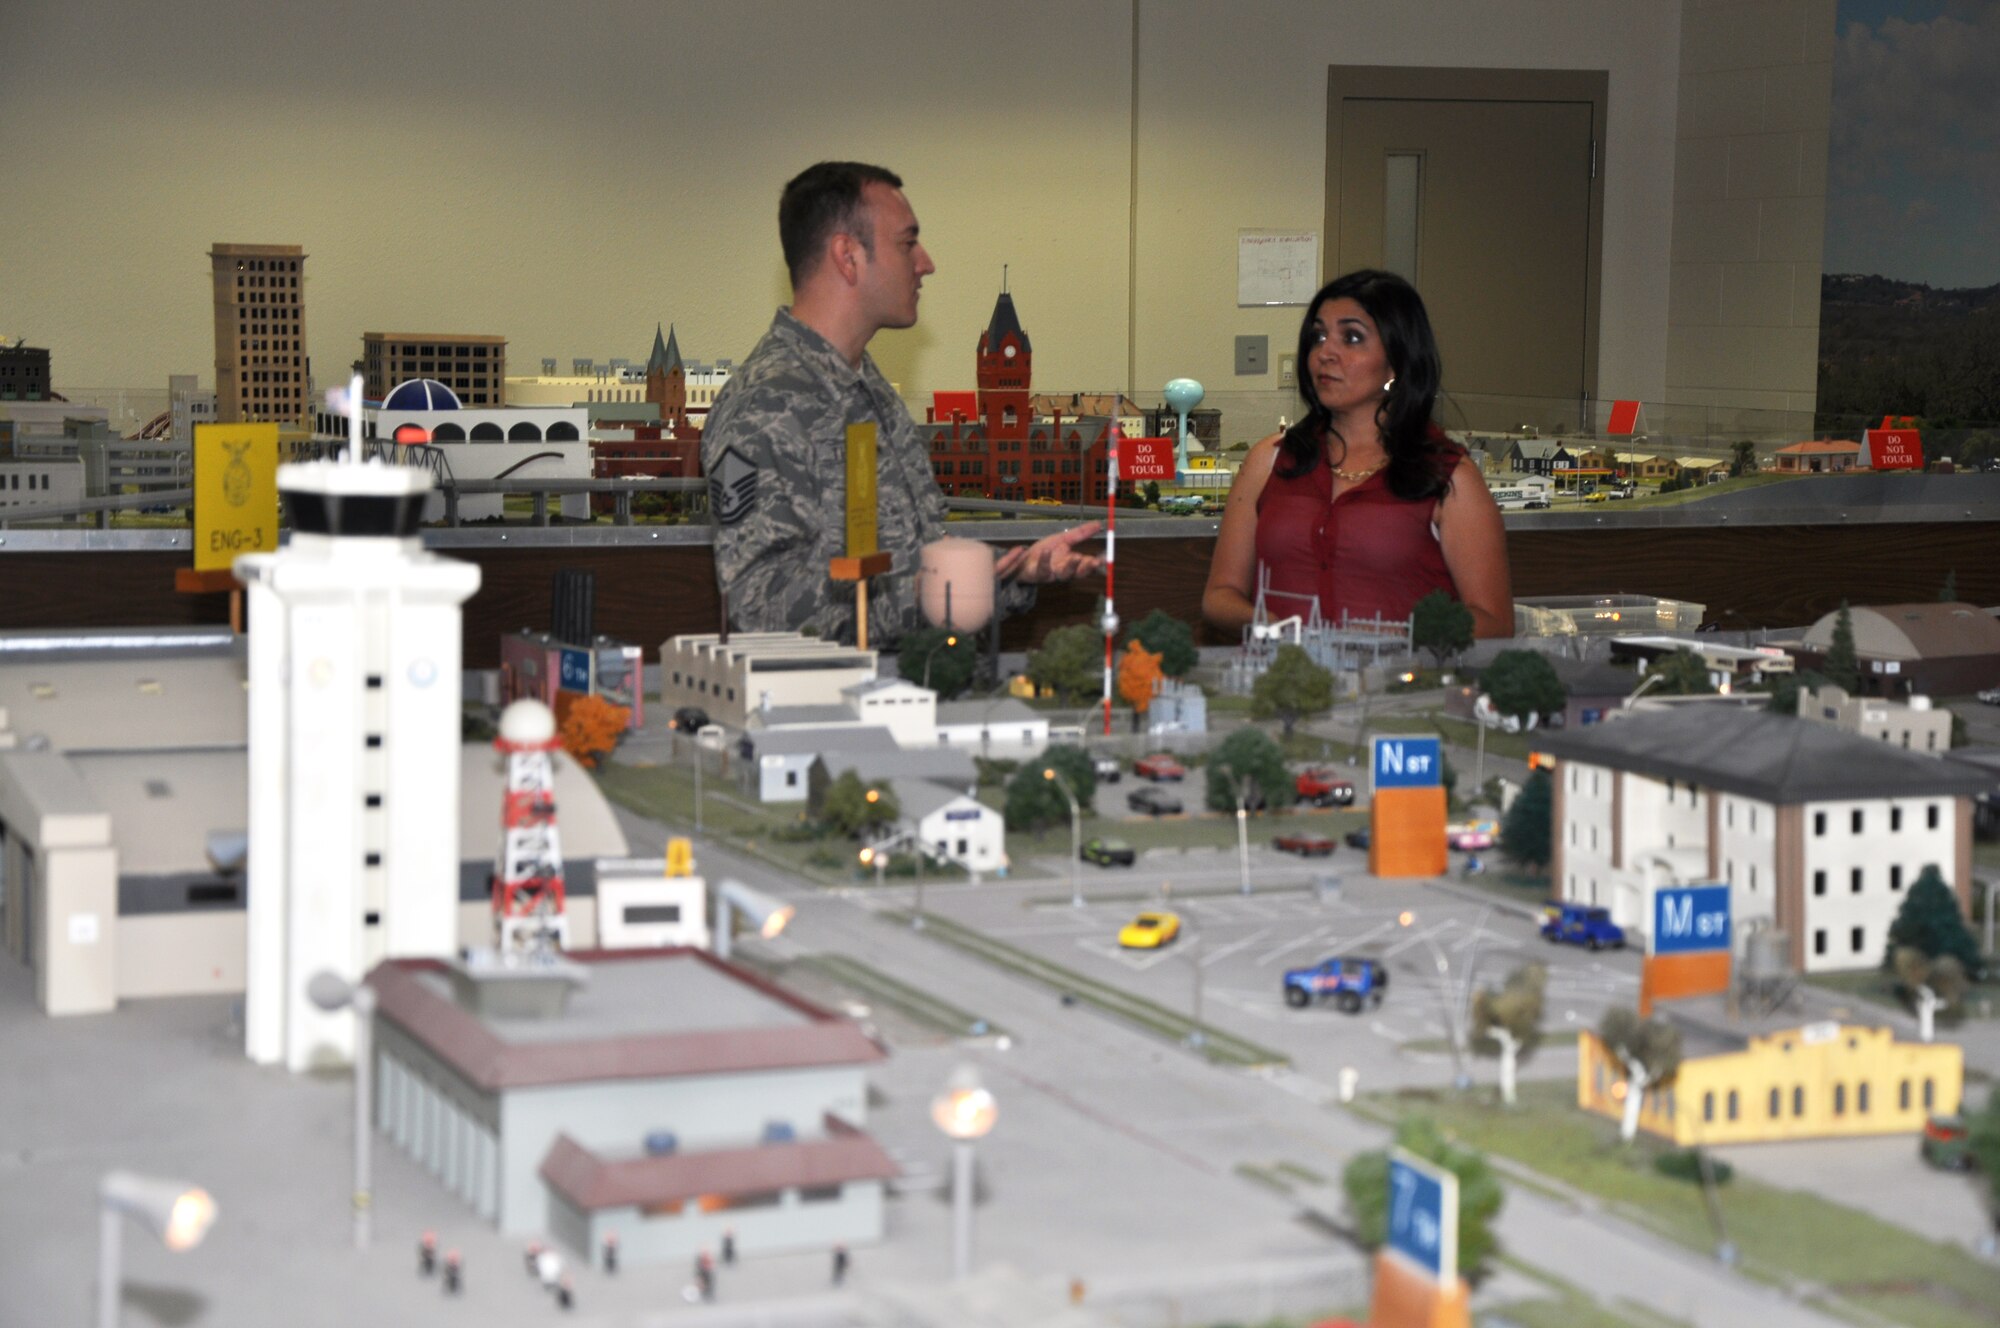 GOODFELLOW AIR FORCE BASE, Texas – Master Sgt. Stephen Thompson, 312th Training Squadron Advanced Course Noncommissioned Officer in Charge, demonstrates to Suzanna Aguirre, San Angelo Chamber of Commerce, how the Norma Brown trainer scale model village works and how it’s used for fire protection training, July 12.  Aguirre visited Goodfellow as a representative of the San Angelo Convention and Visitors Bureau.  (U.S. Air Force photo/ Airman 1st Class Joshua Edwards)